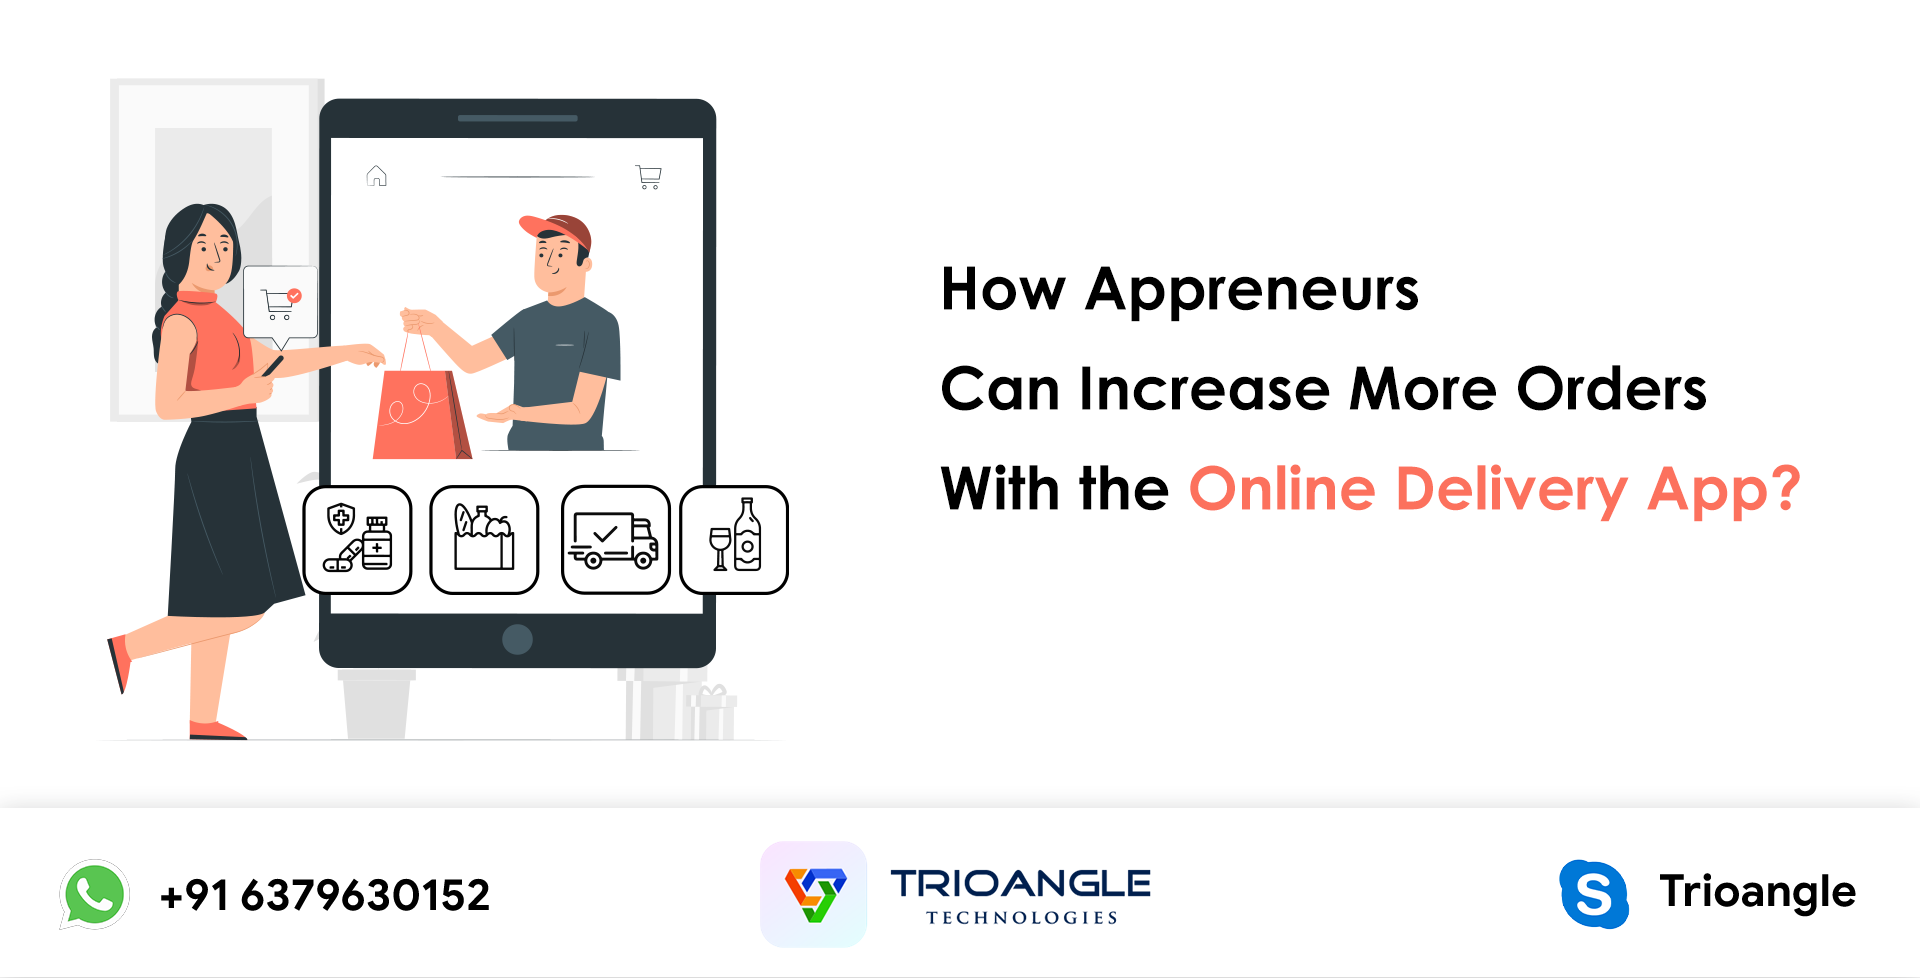 How Appreneurs Can Increase More Orders With the Online Delivery App?